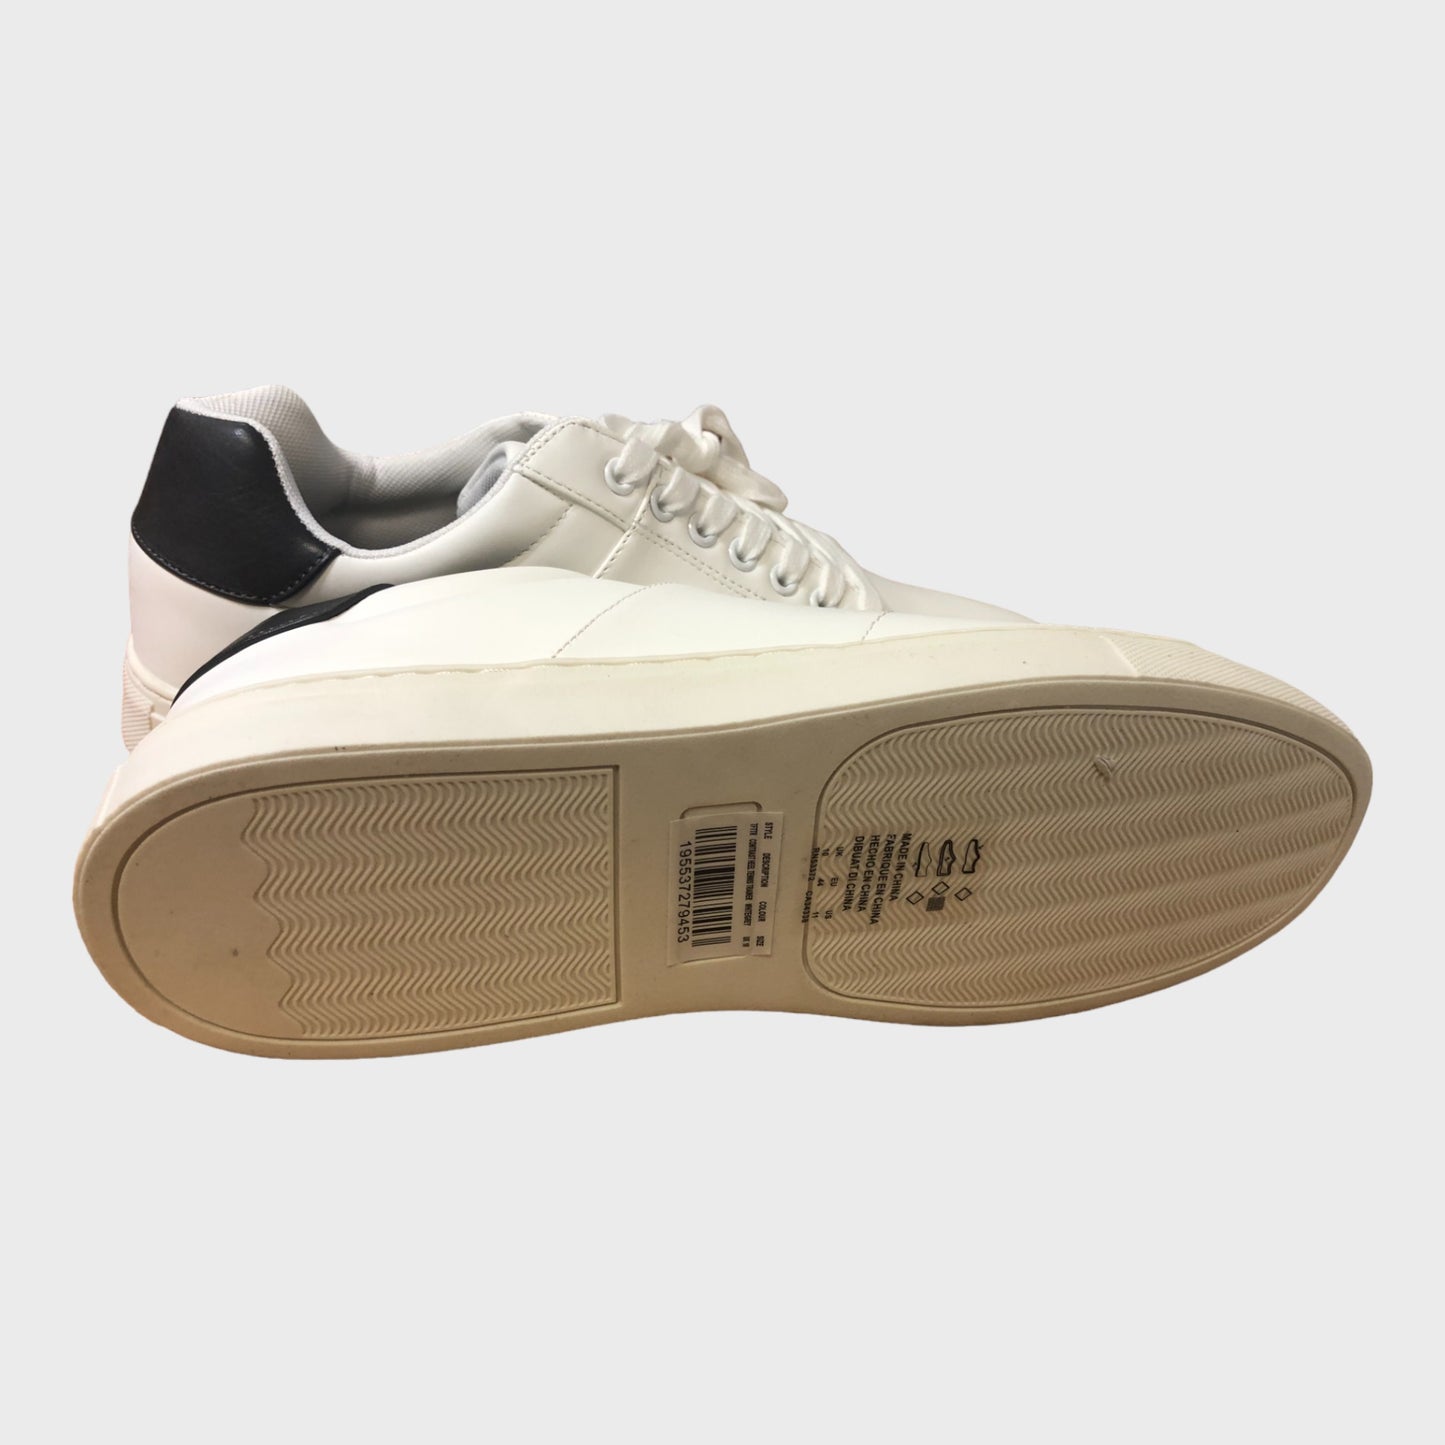 Men's 'French Connection' White Shoes